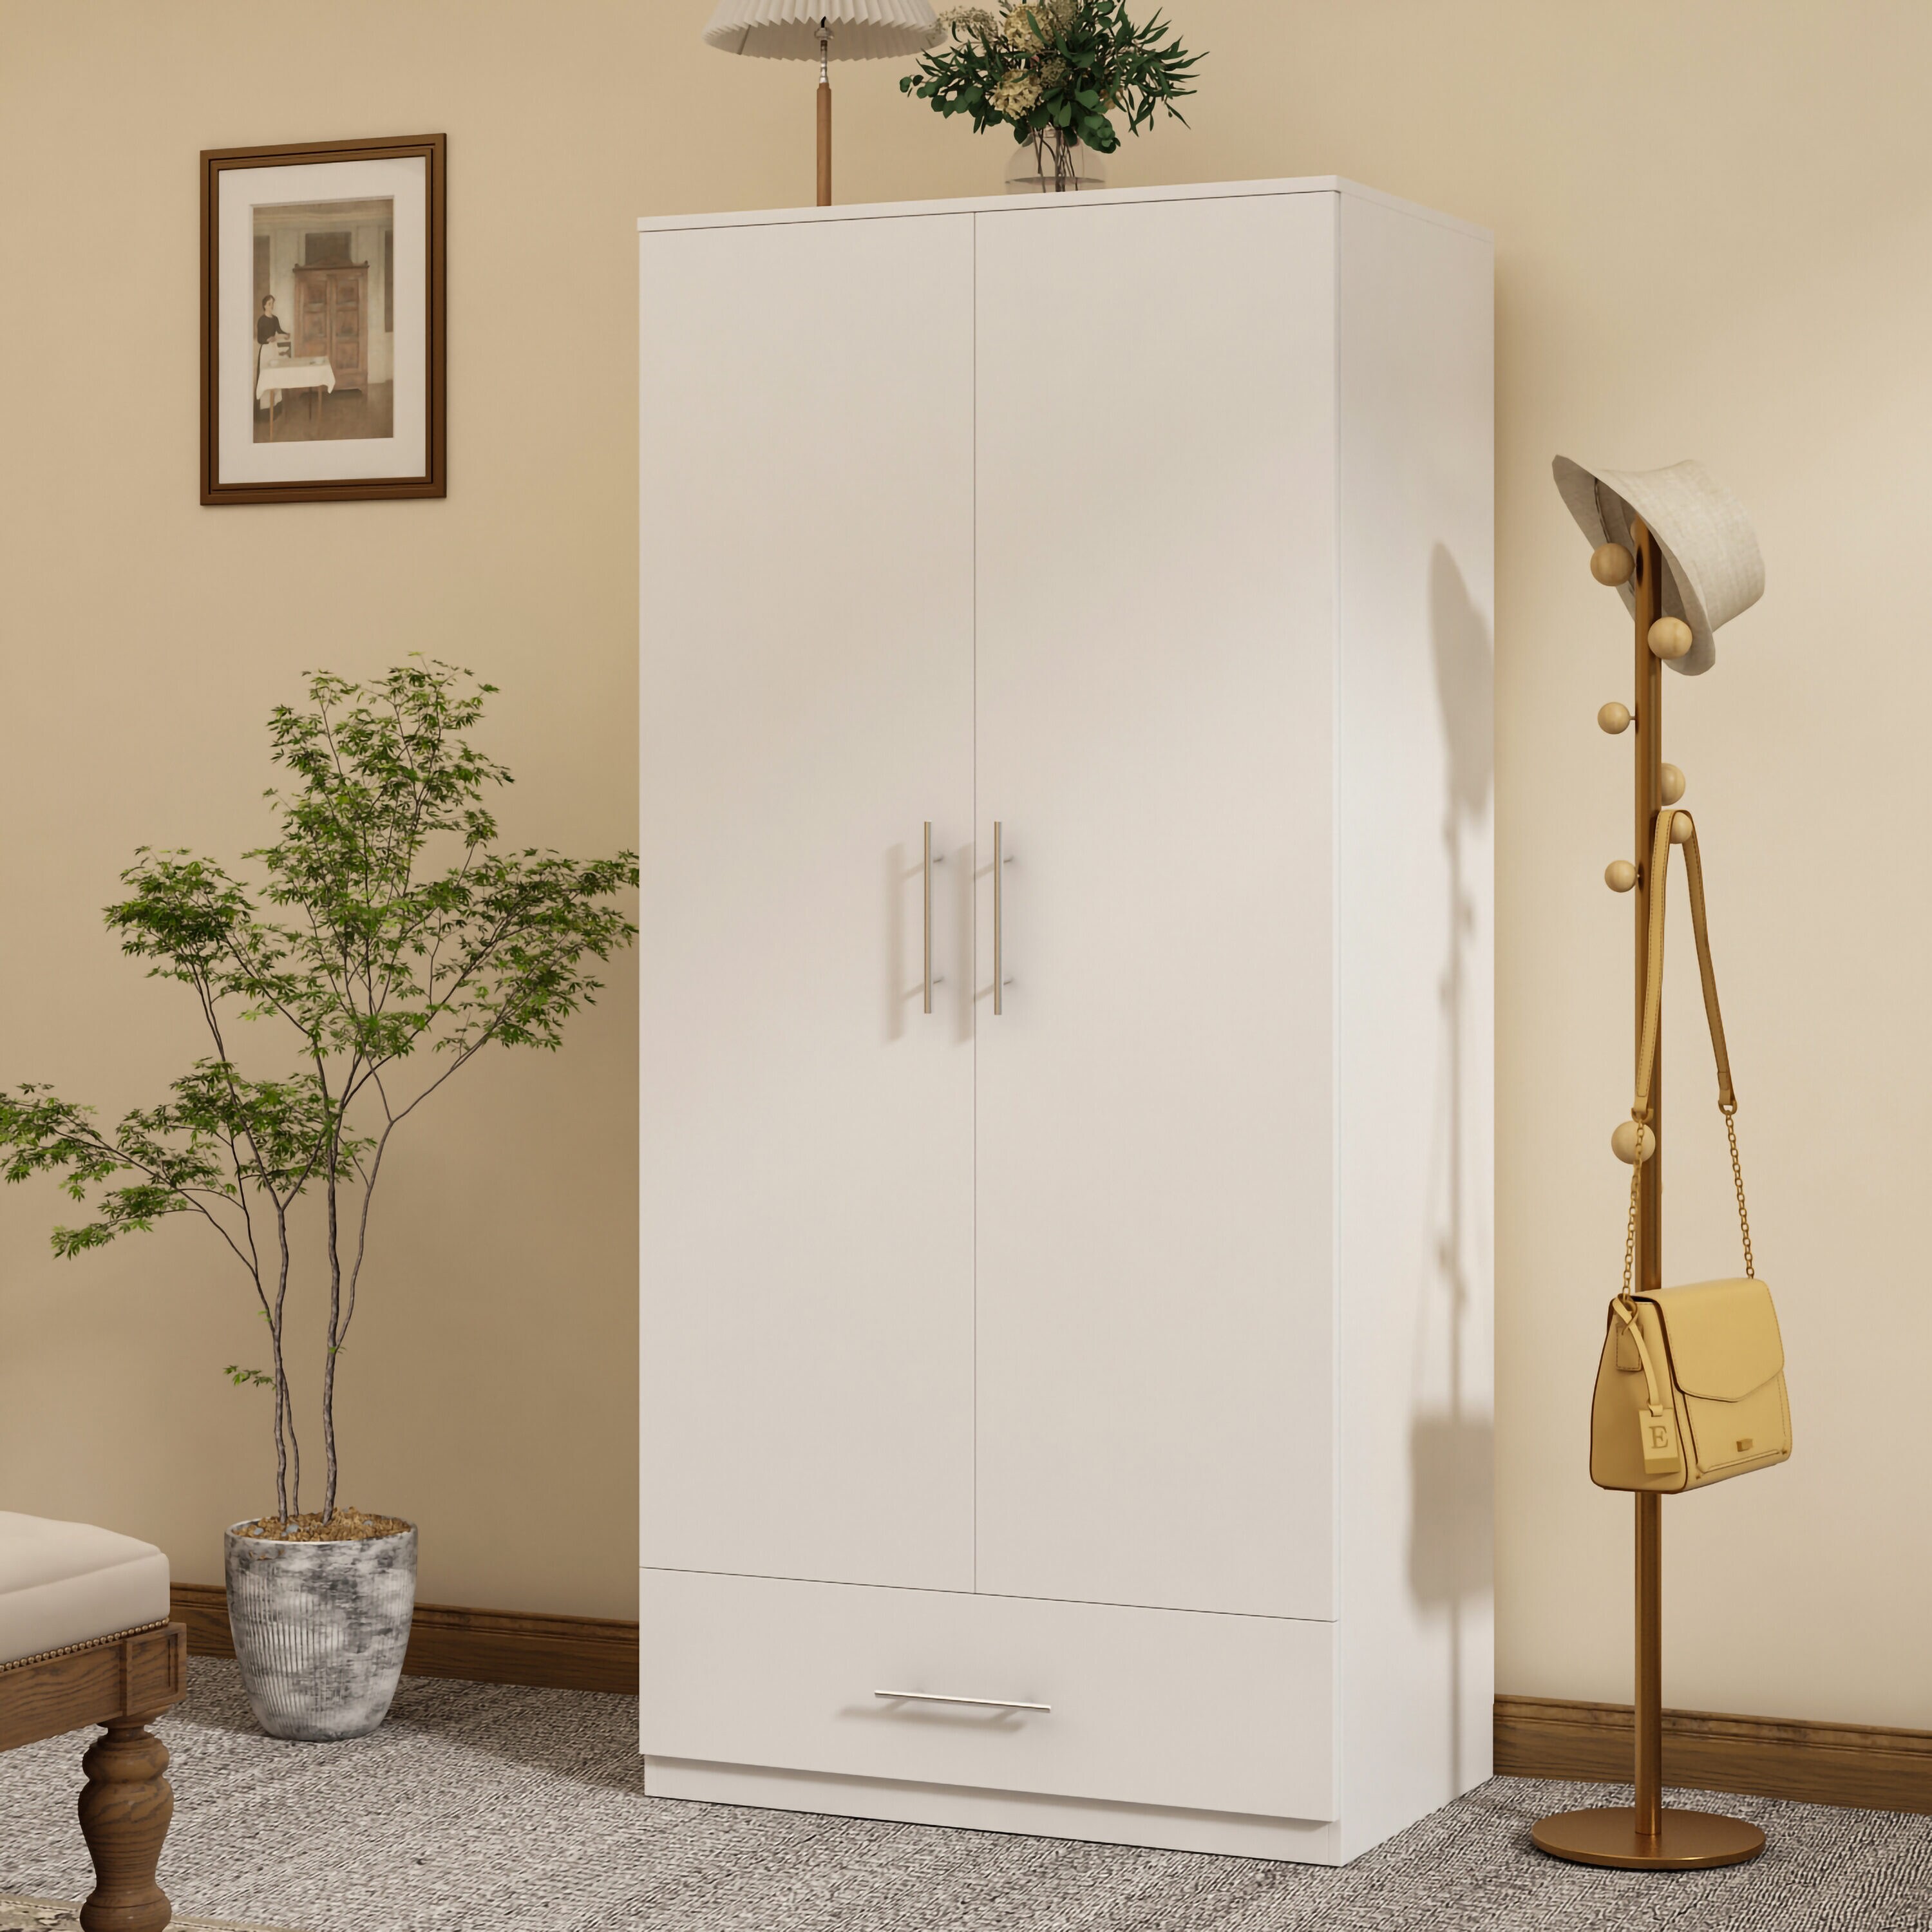 FUFU&GAGA Contemporary 2-Door Wardrobe with Drawer, Clothes Rail, and  Moisture-Proof Base - White Finish, Assembly Required in the Armoires  department at